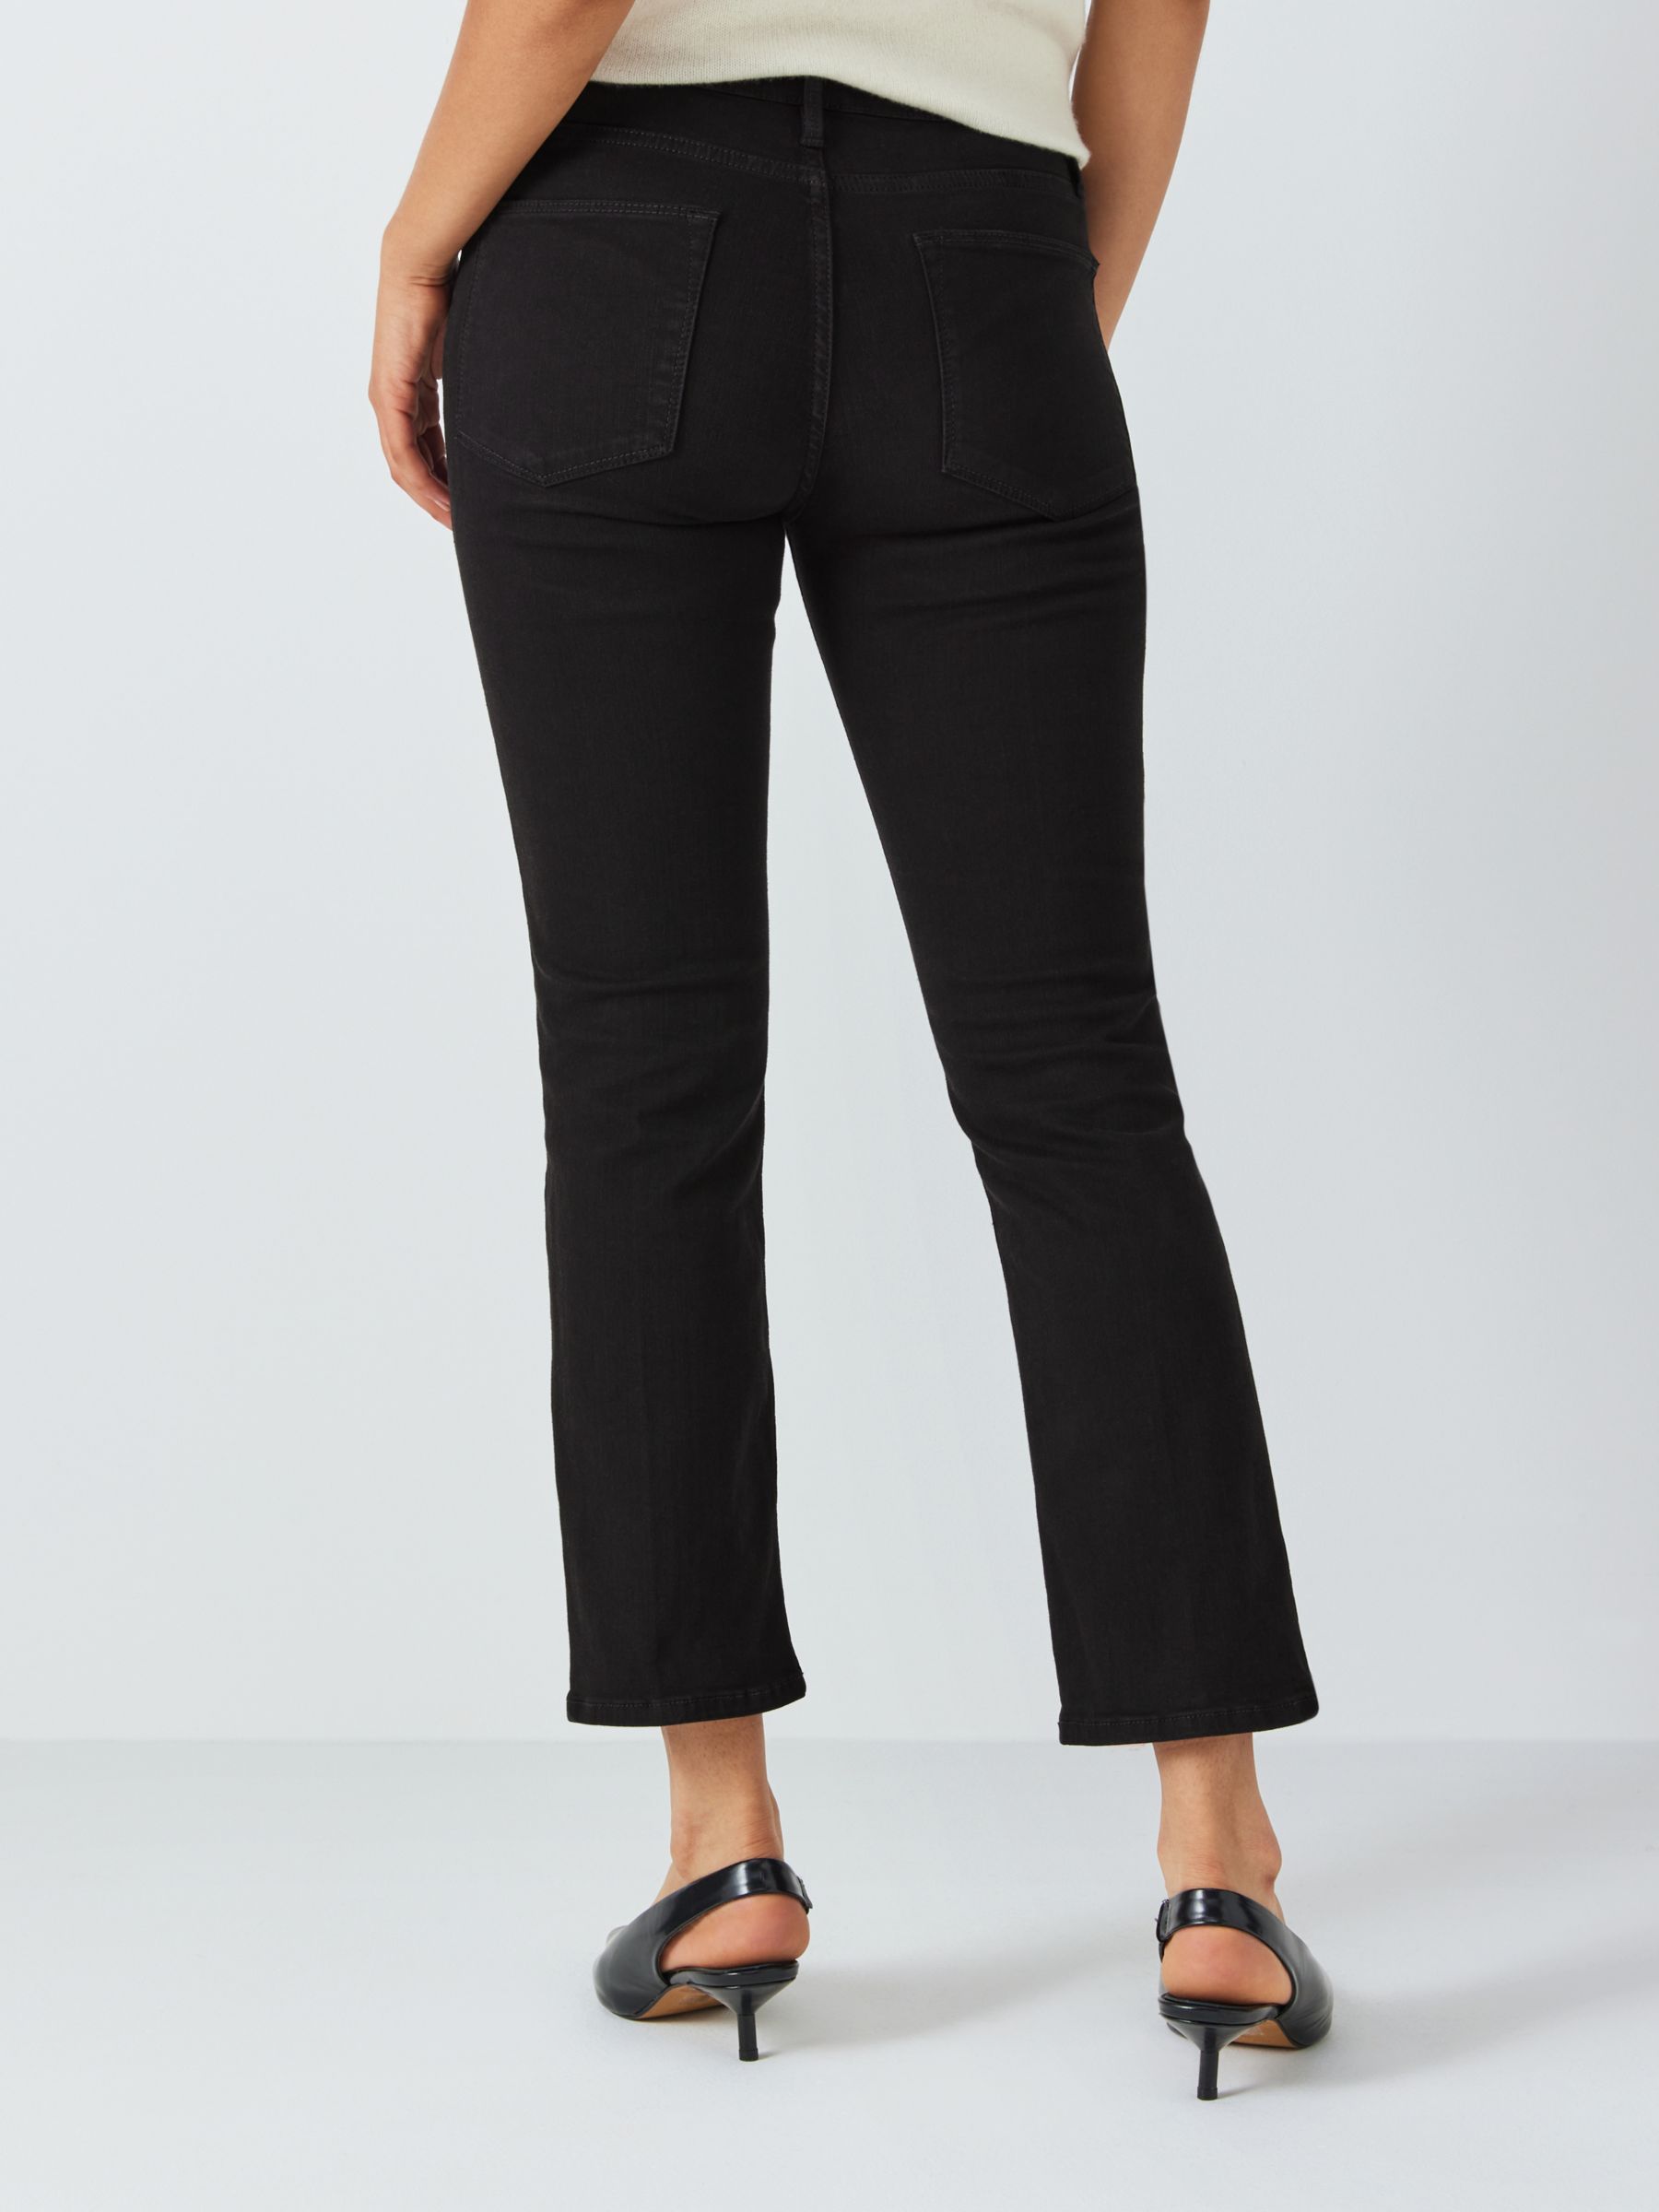 FRAME Le High Flare Jeans, Sutherland at John Lewis & Partners